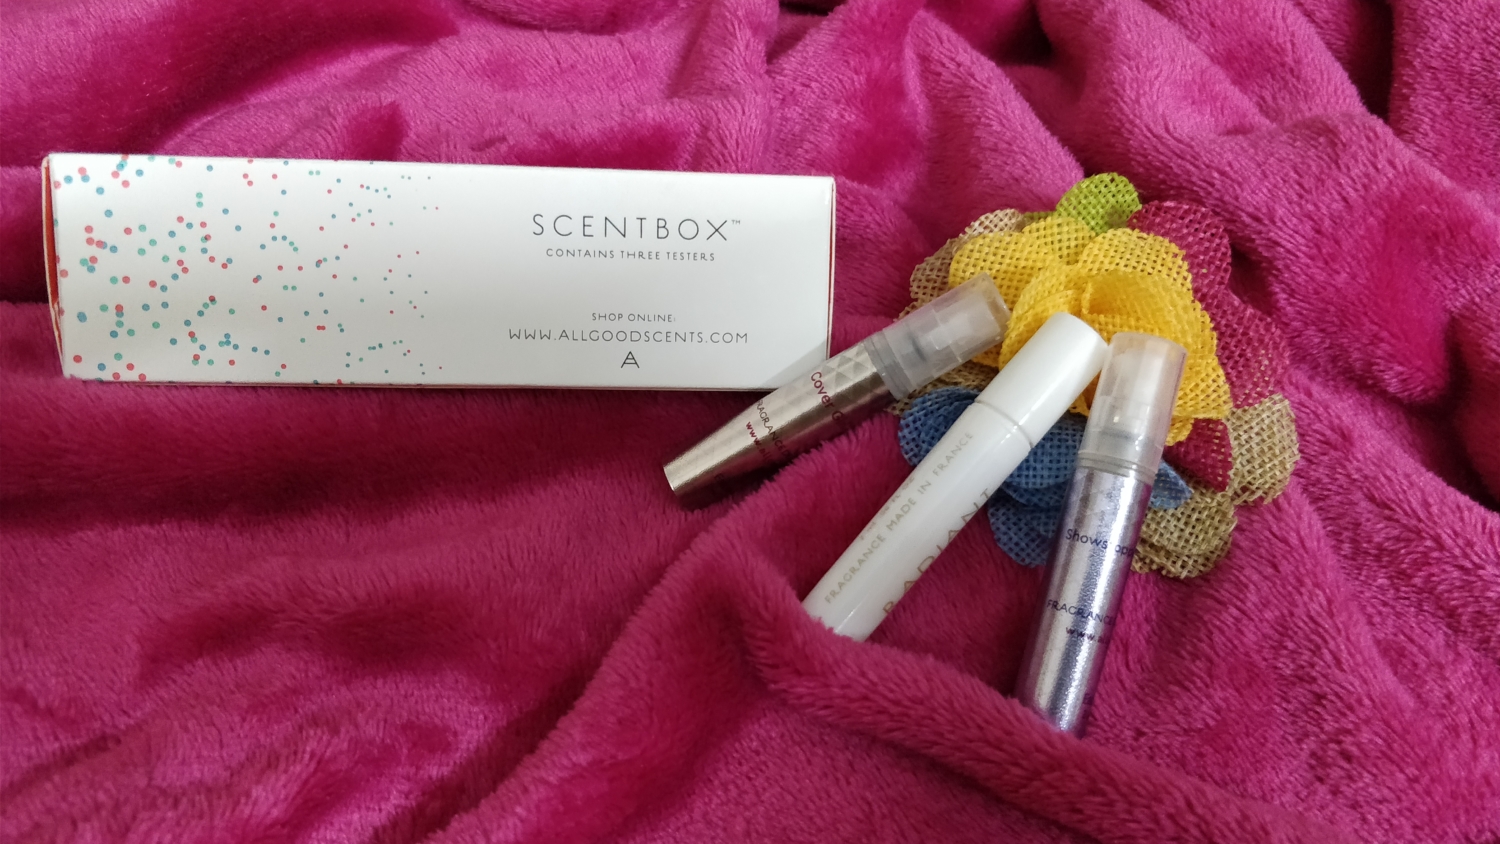 free beauty products